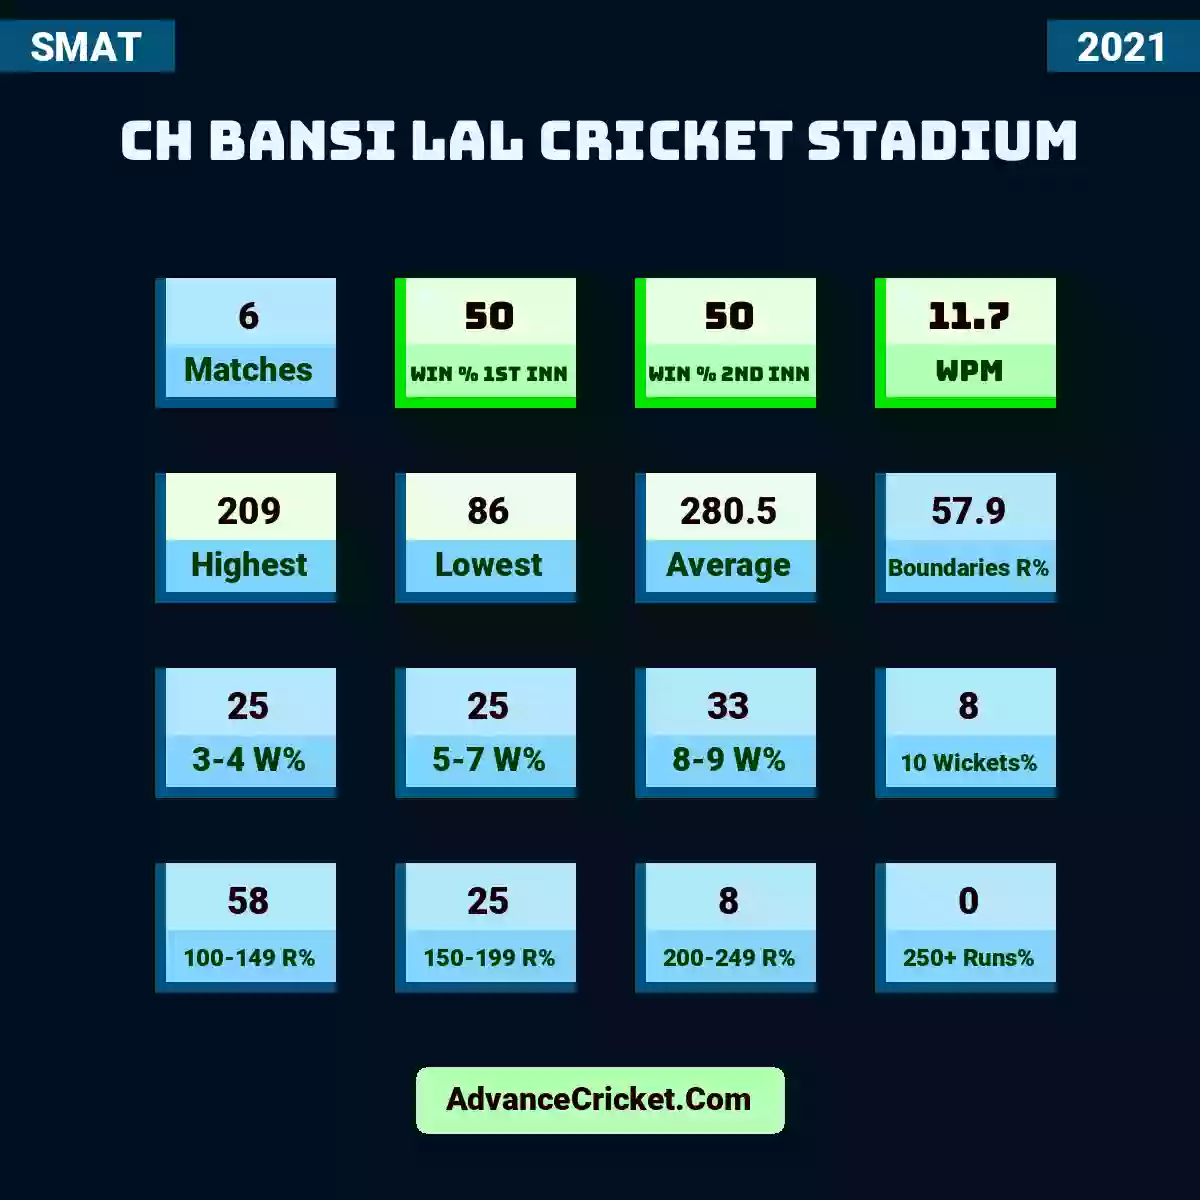 Image showing CH Bansi Lal Cricket Stadium with Matches: 6, Win % 1st Inn: 50, Win % 2nd Inn: 50, WPM: 11.7, Highest: 209, Lowest: 86, Average: 280.5, Boundaries R%: 57.9, 3-4 W%: 25, 5-7 W%: 25, 8-9 W%: 33, 10 Wickets%: 8, 100-149 R%: 58, 150-199 R%: 25, 200-249 R%: 8, 250+ Runs%: 0.